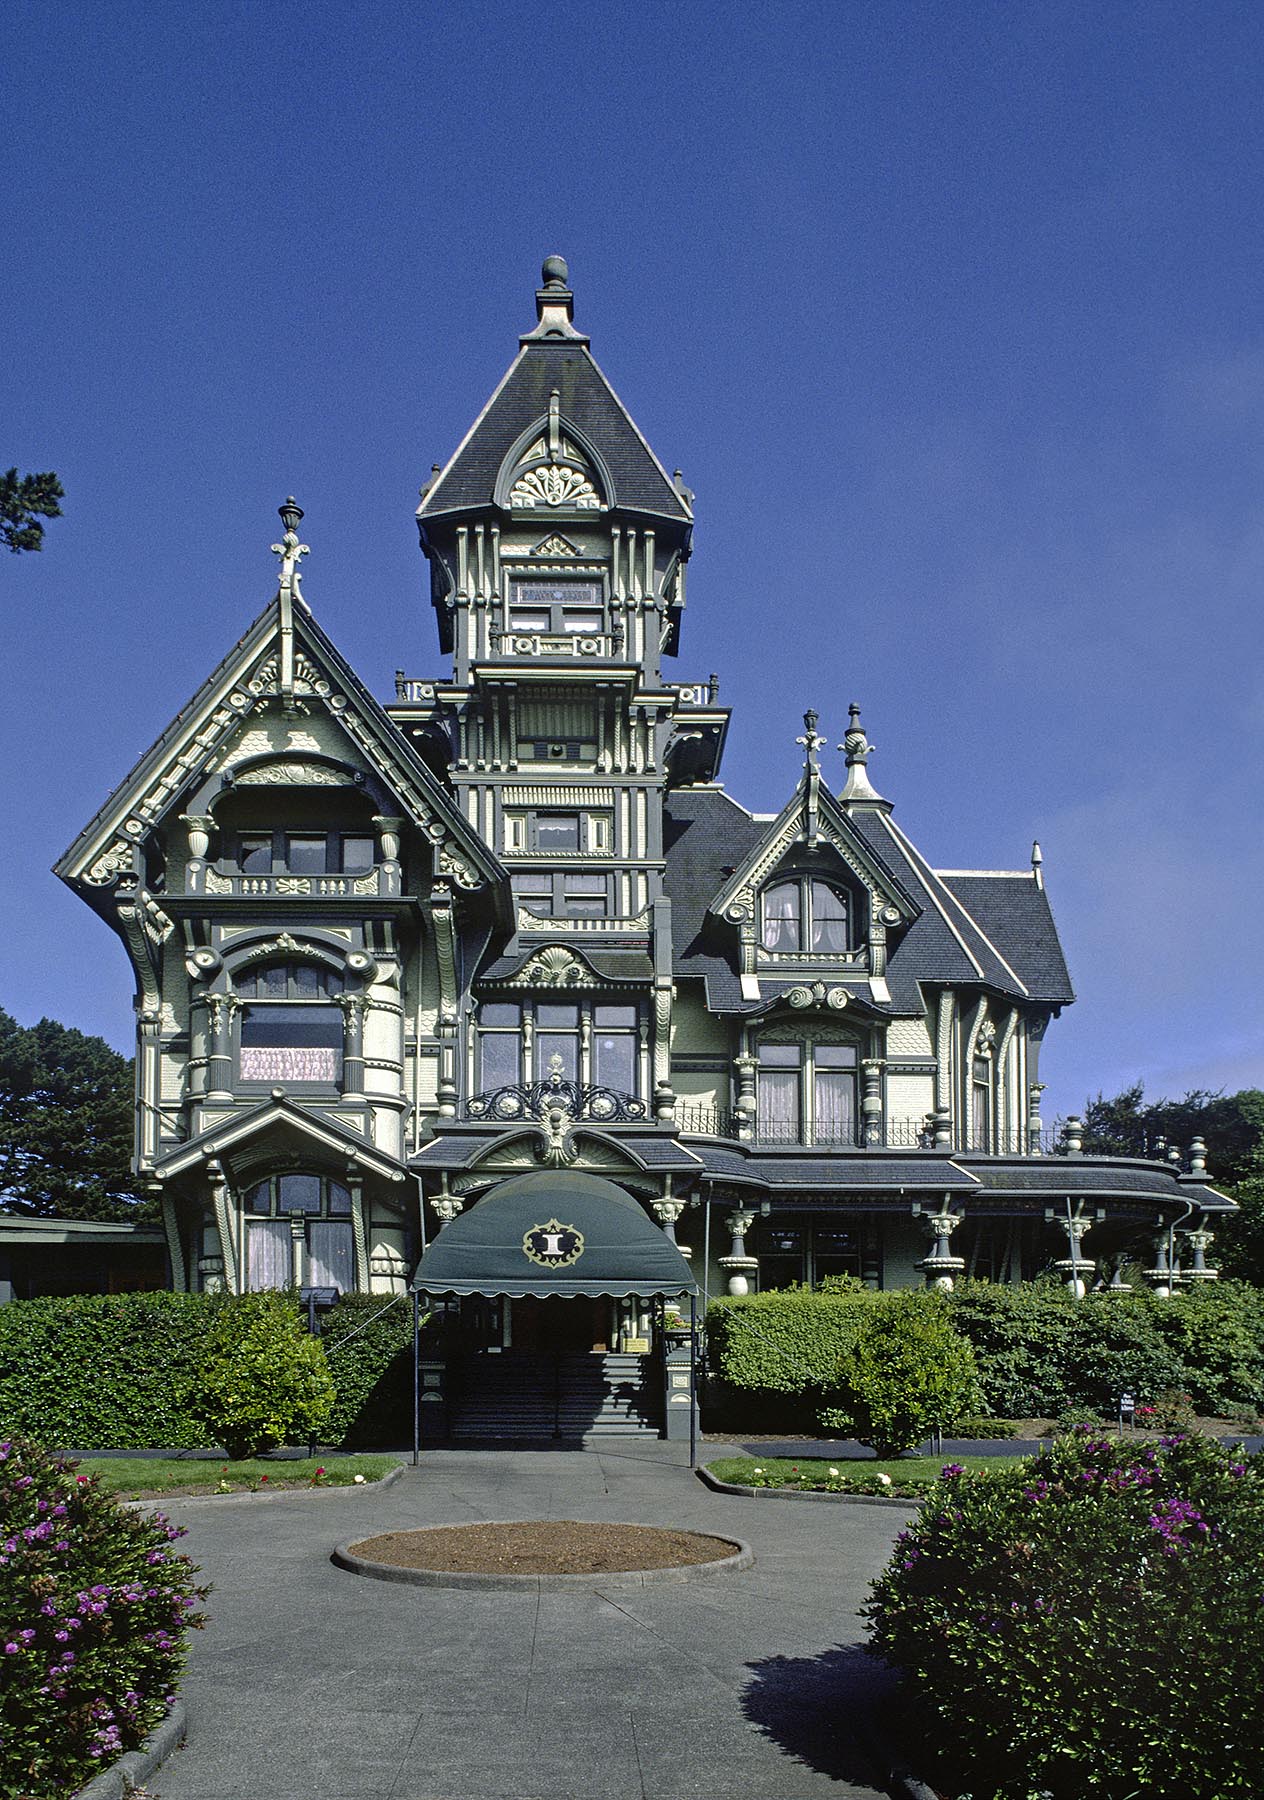 THE CARSON MANSION is the crown jewel of OLD TOWN EUREKA and is now used as a private club - CALIFORNIA